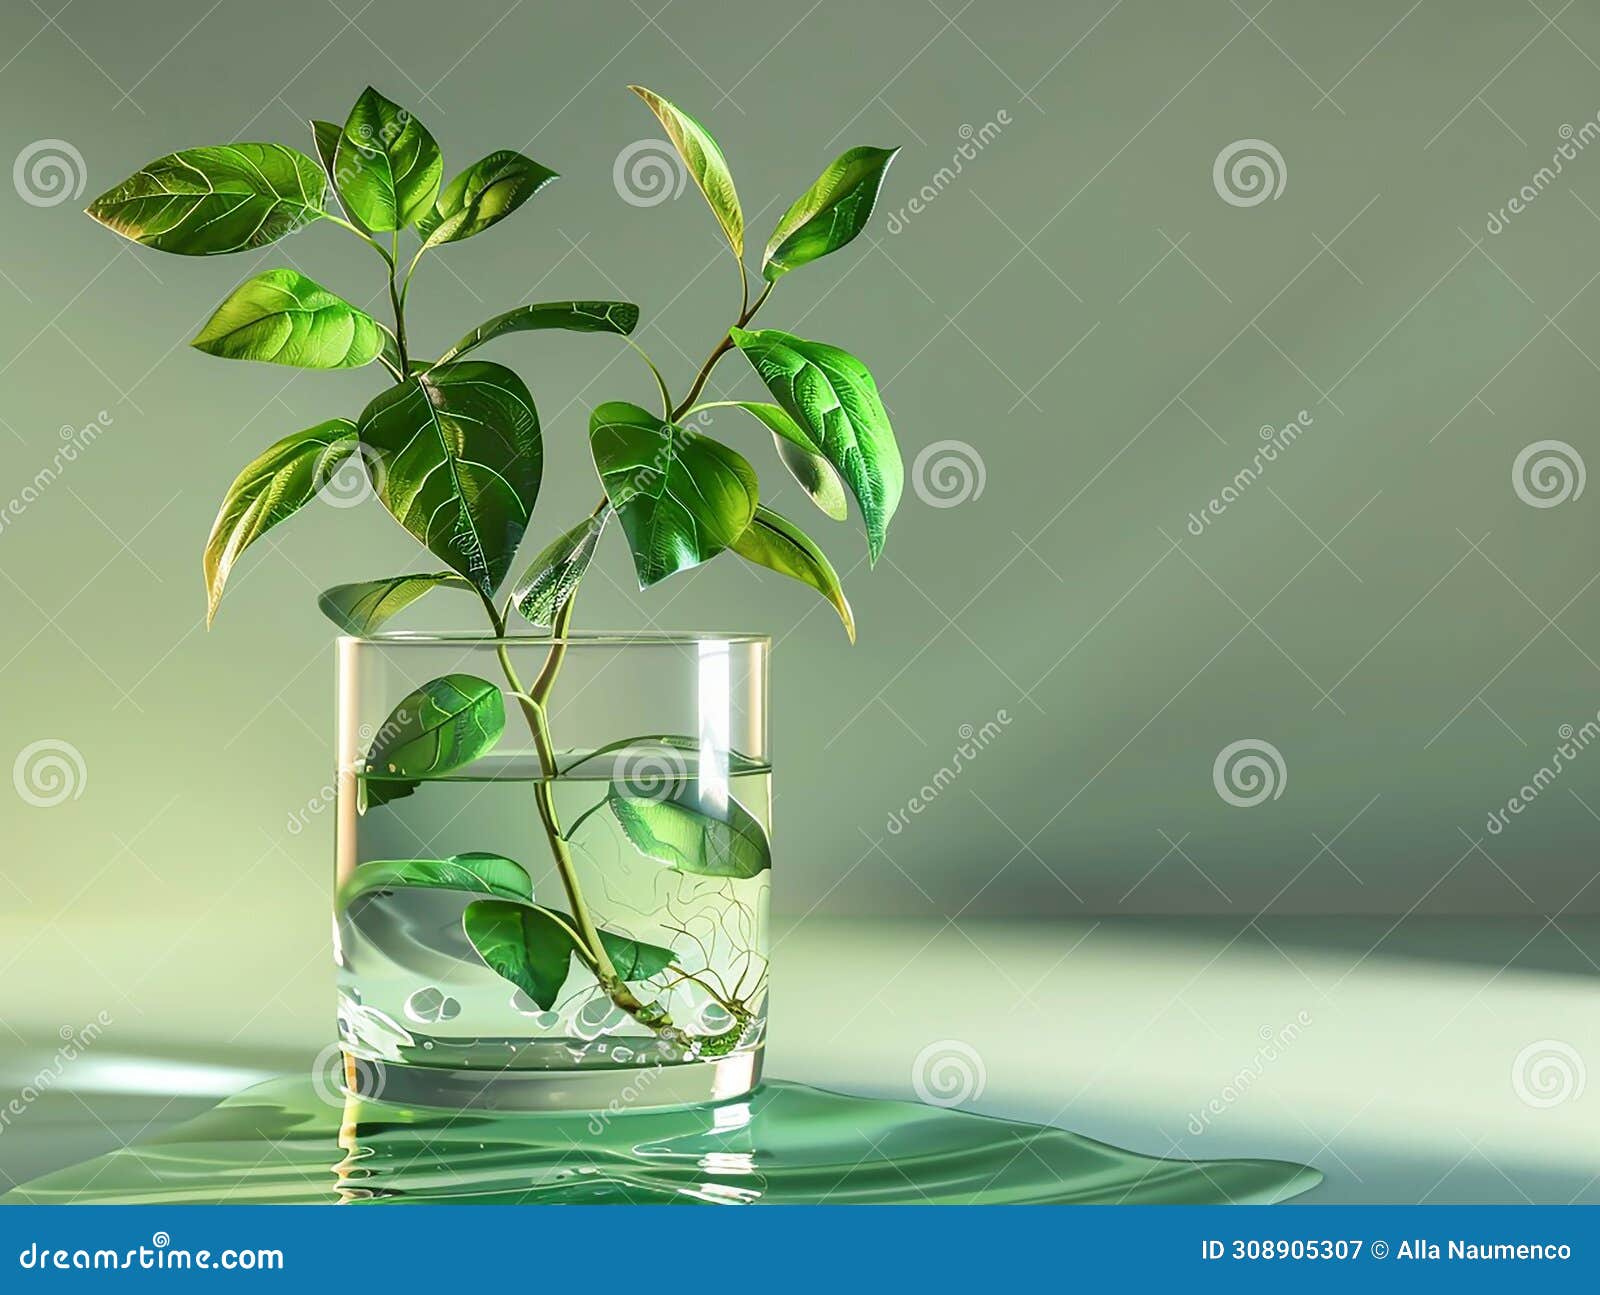 potus plant growing in glass vase with water.